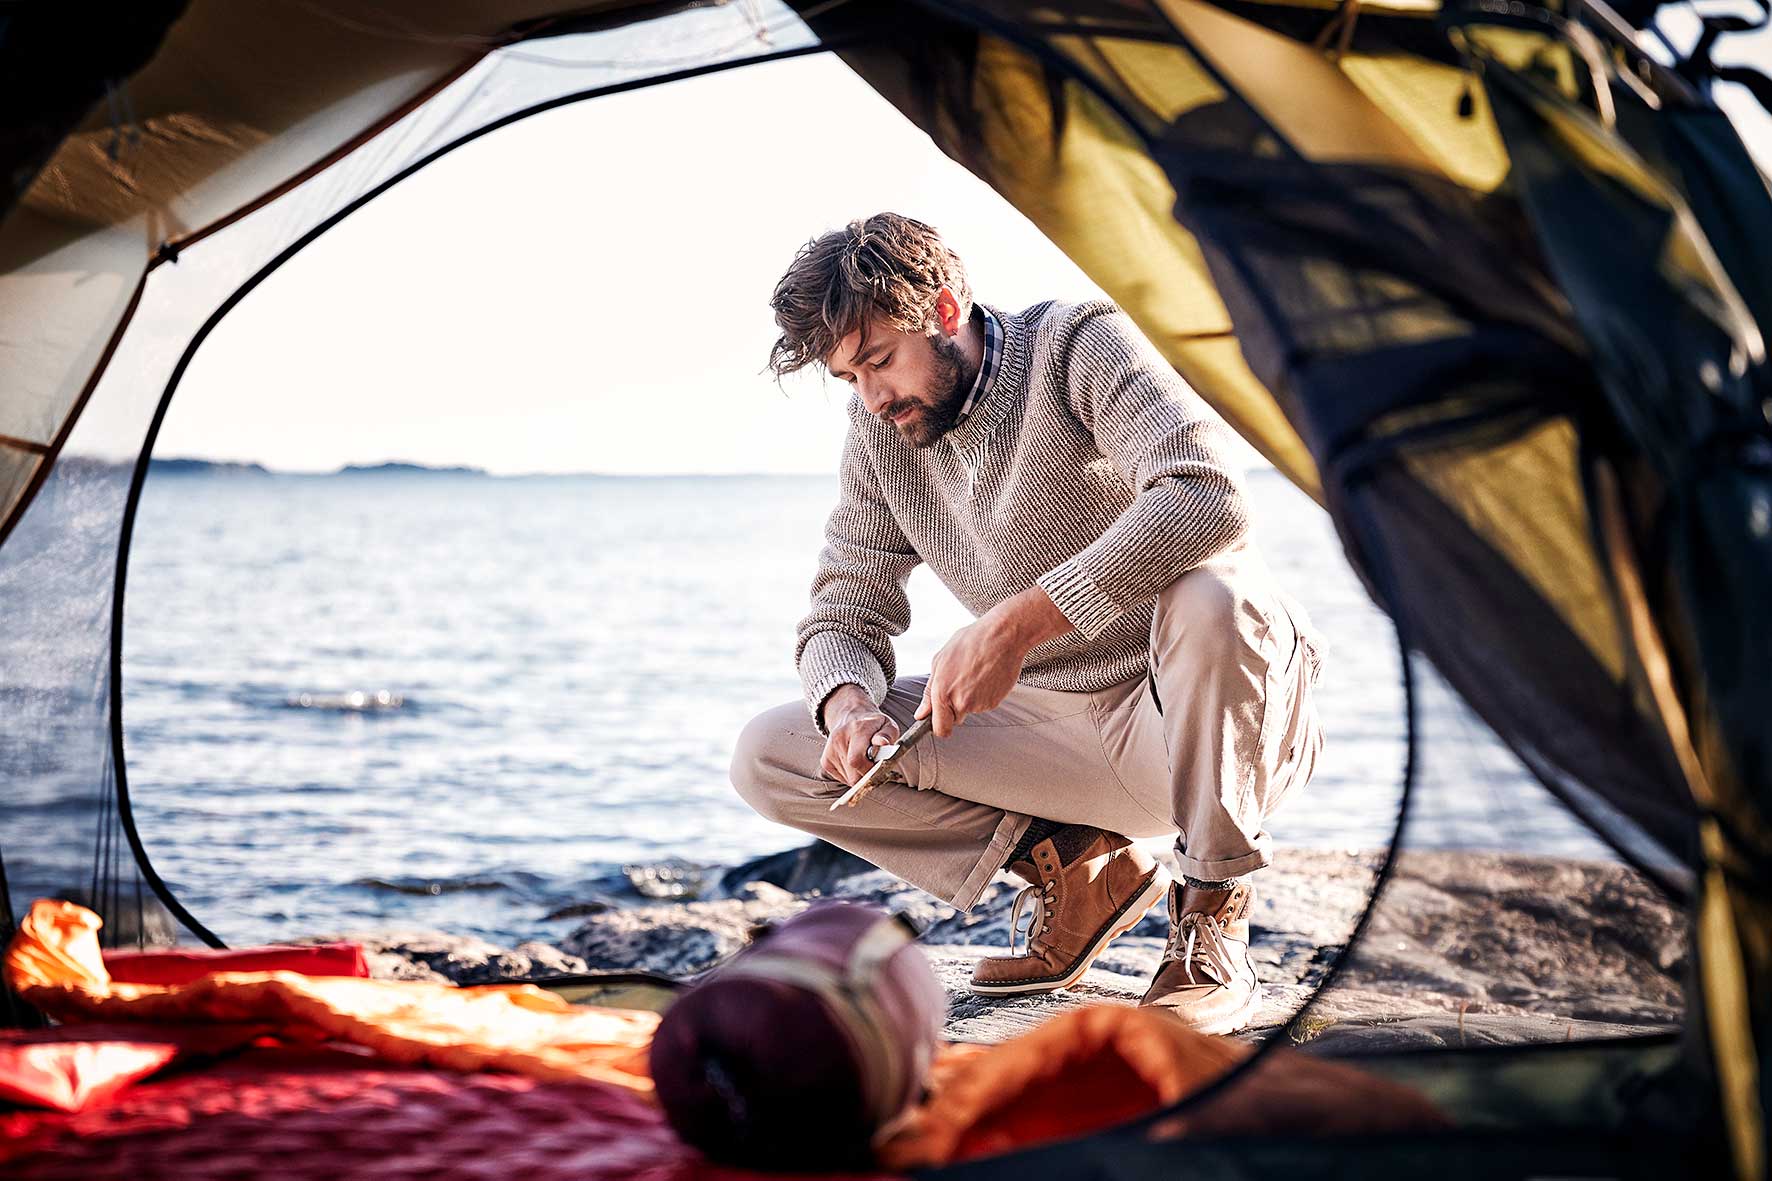 Nicklas crouching on a rock near the sea wearing fair fashion and whittling away at a stick, shot through the inside of his tent.